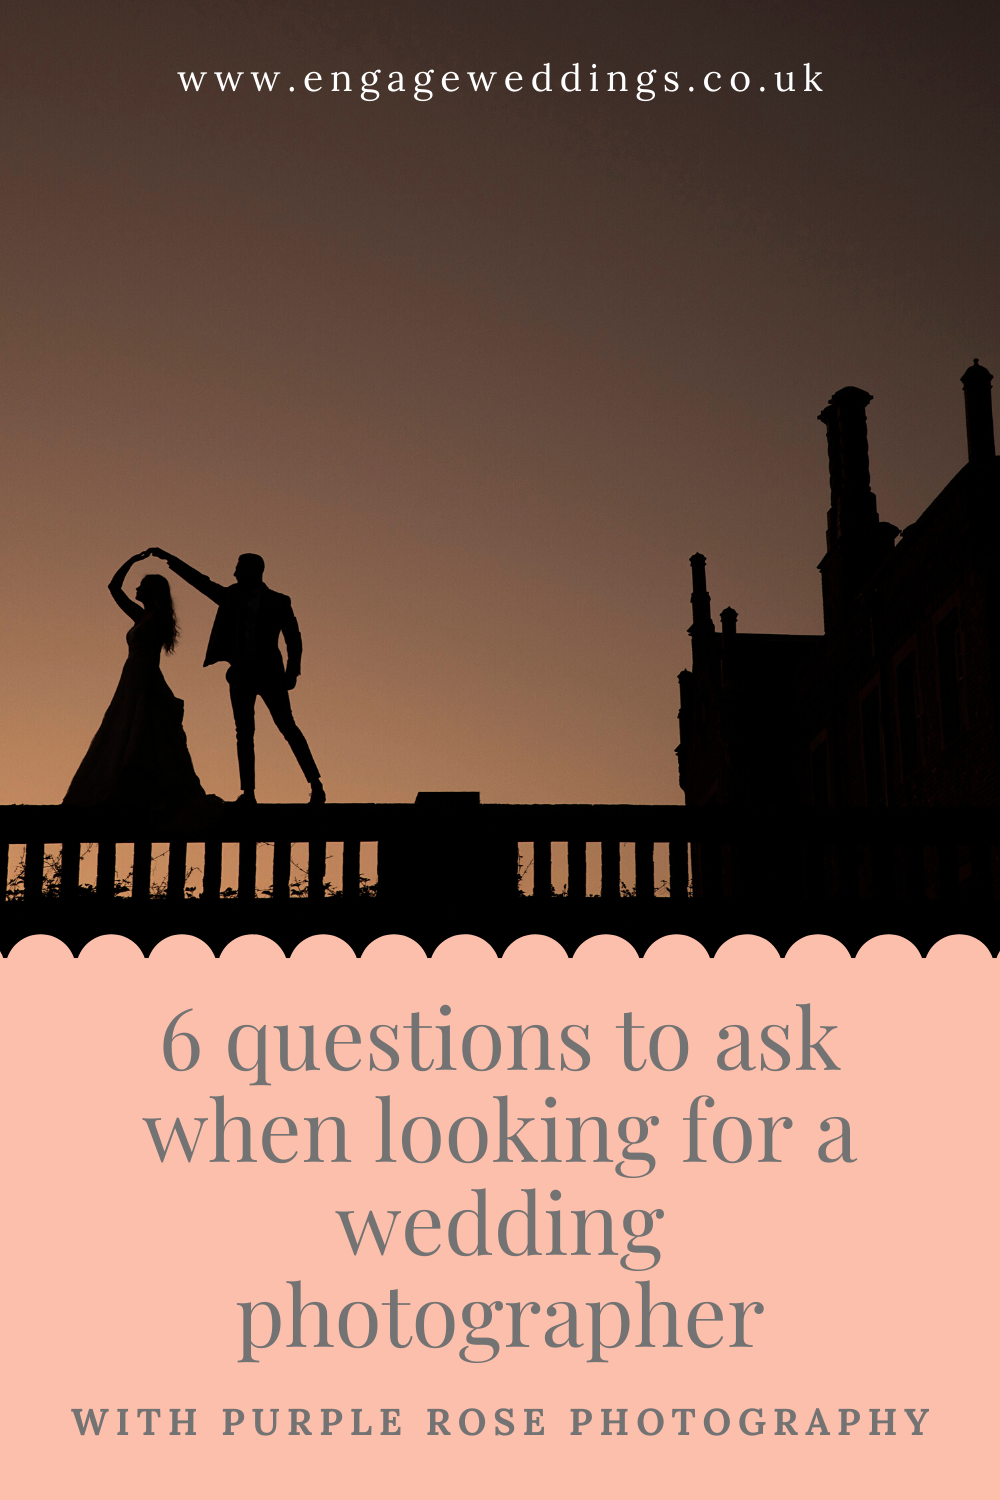 6 questions to ask when looking for a wedding photographer_engageweddings.co.uk